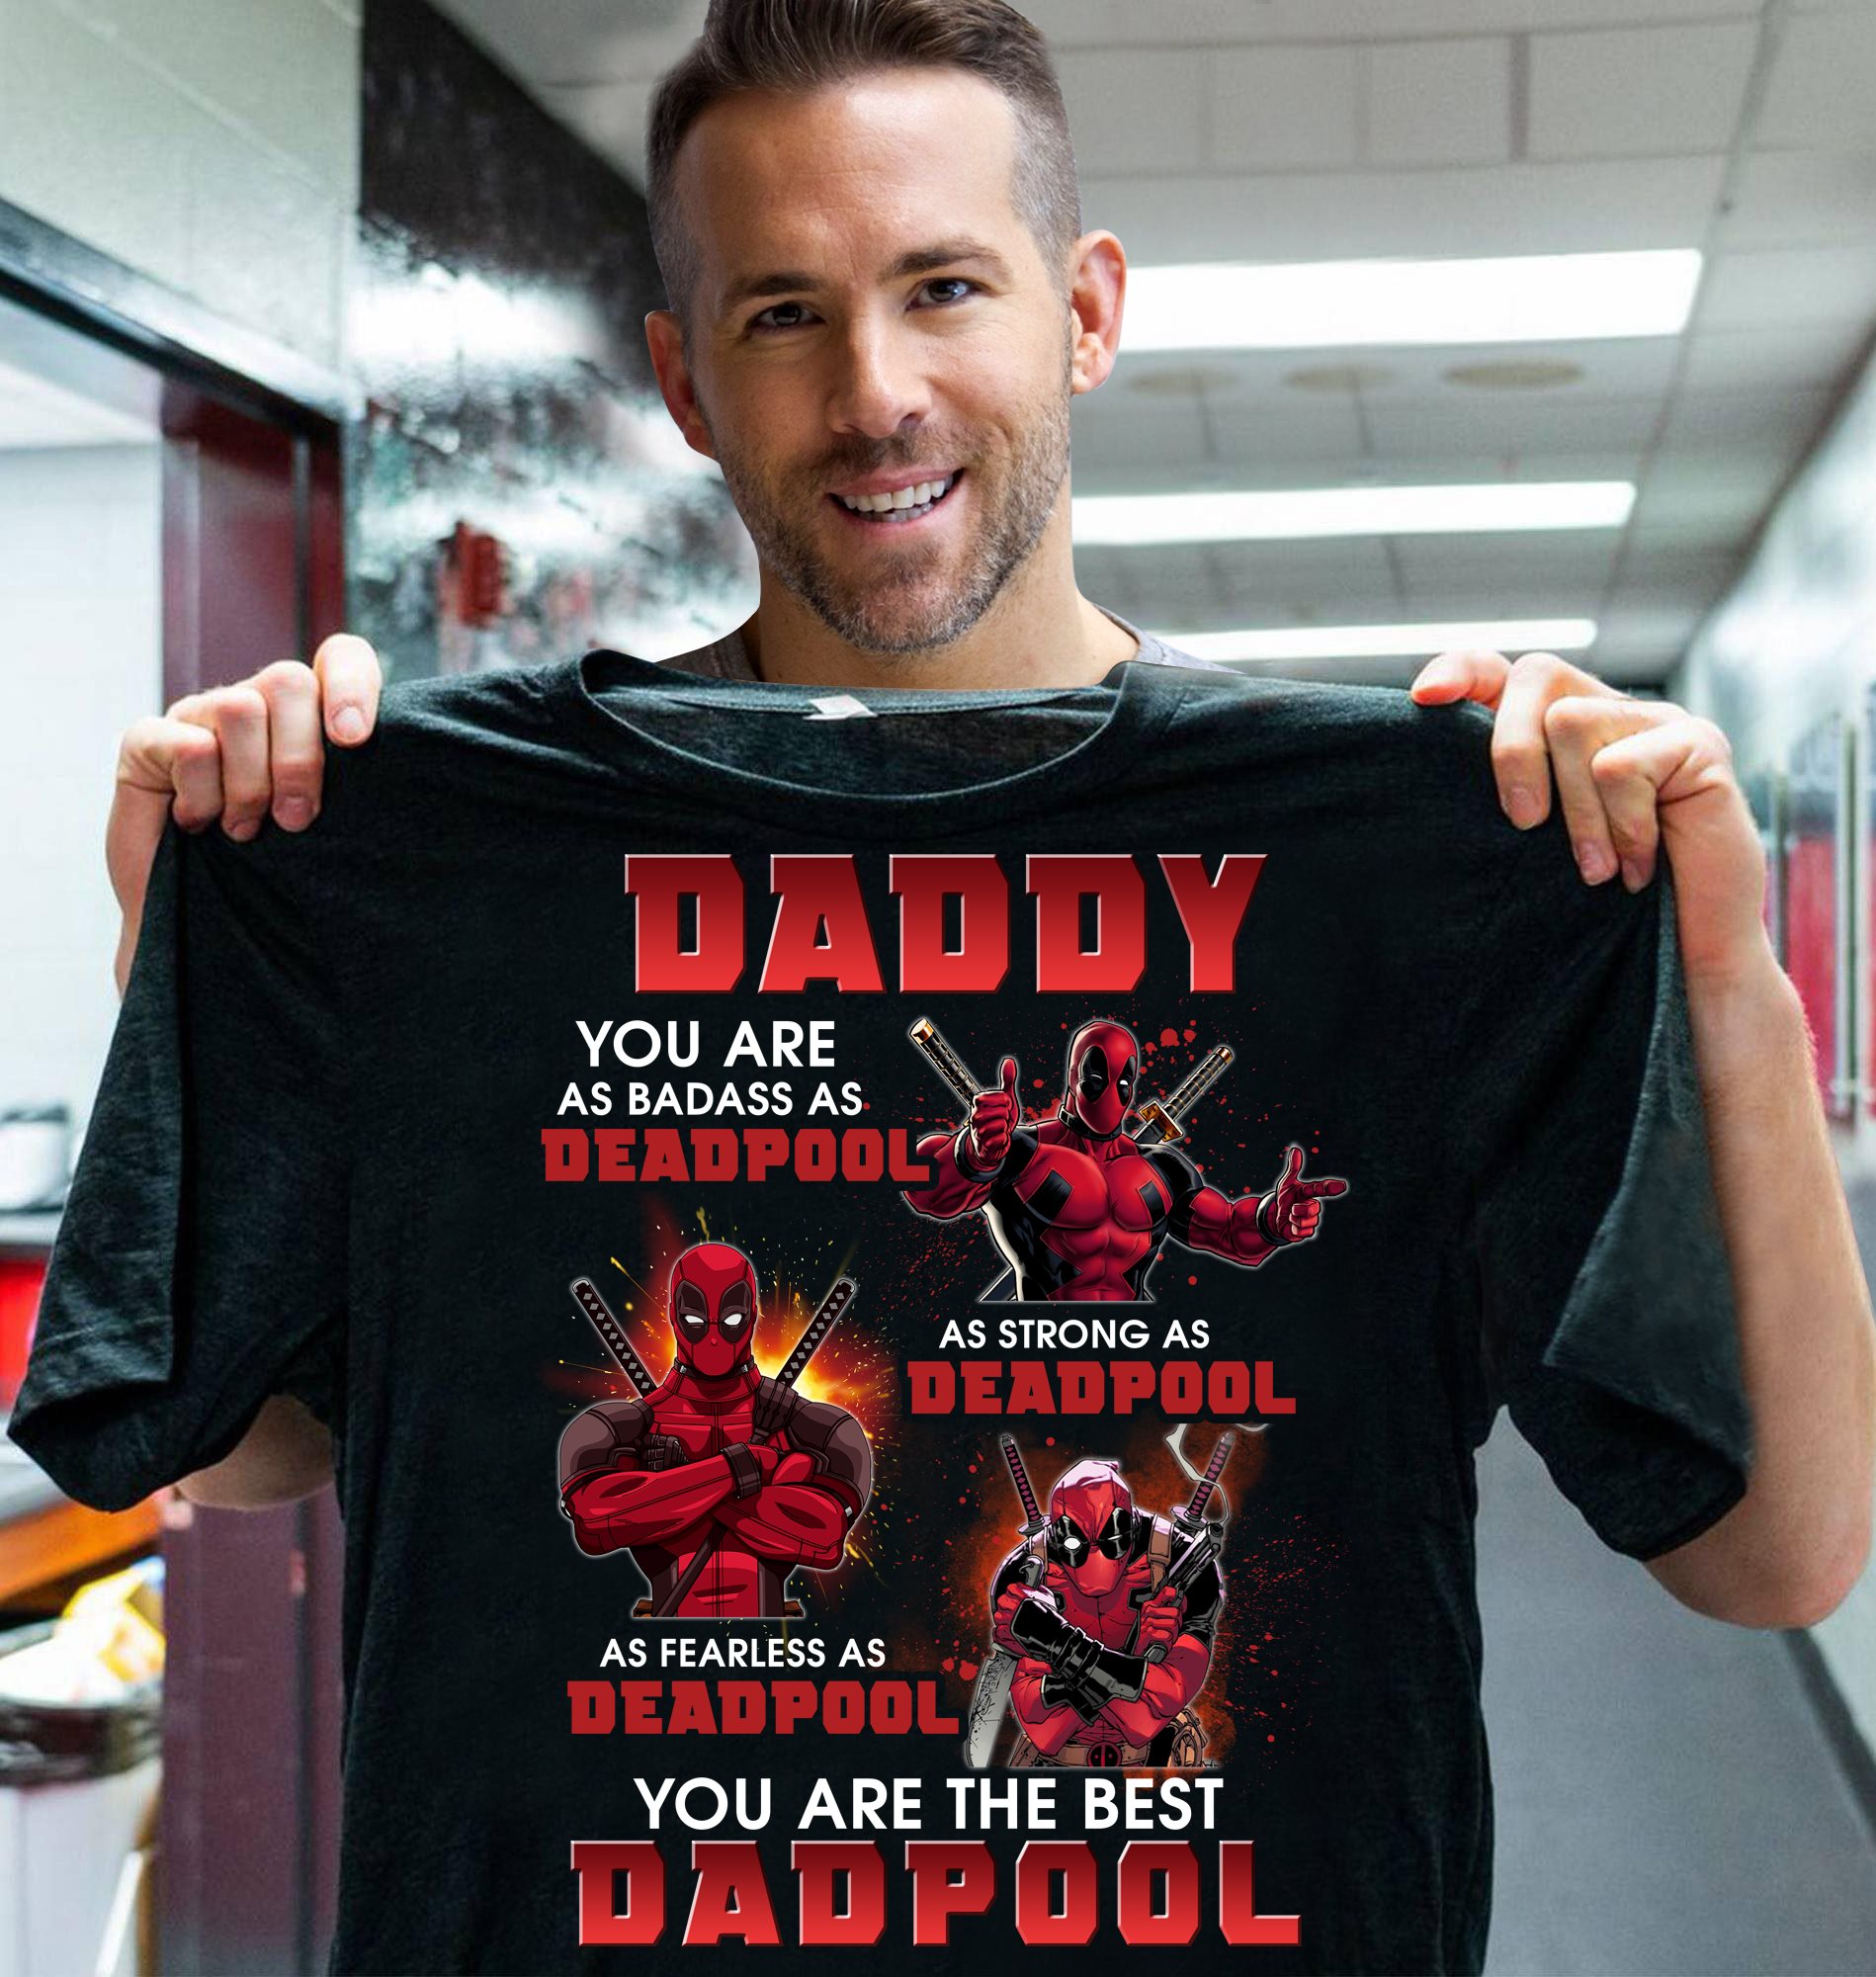 Daddy you are as badass as deadpool as strong as deadpool as fearless as deadpool - Father's day gift